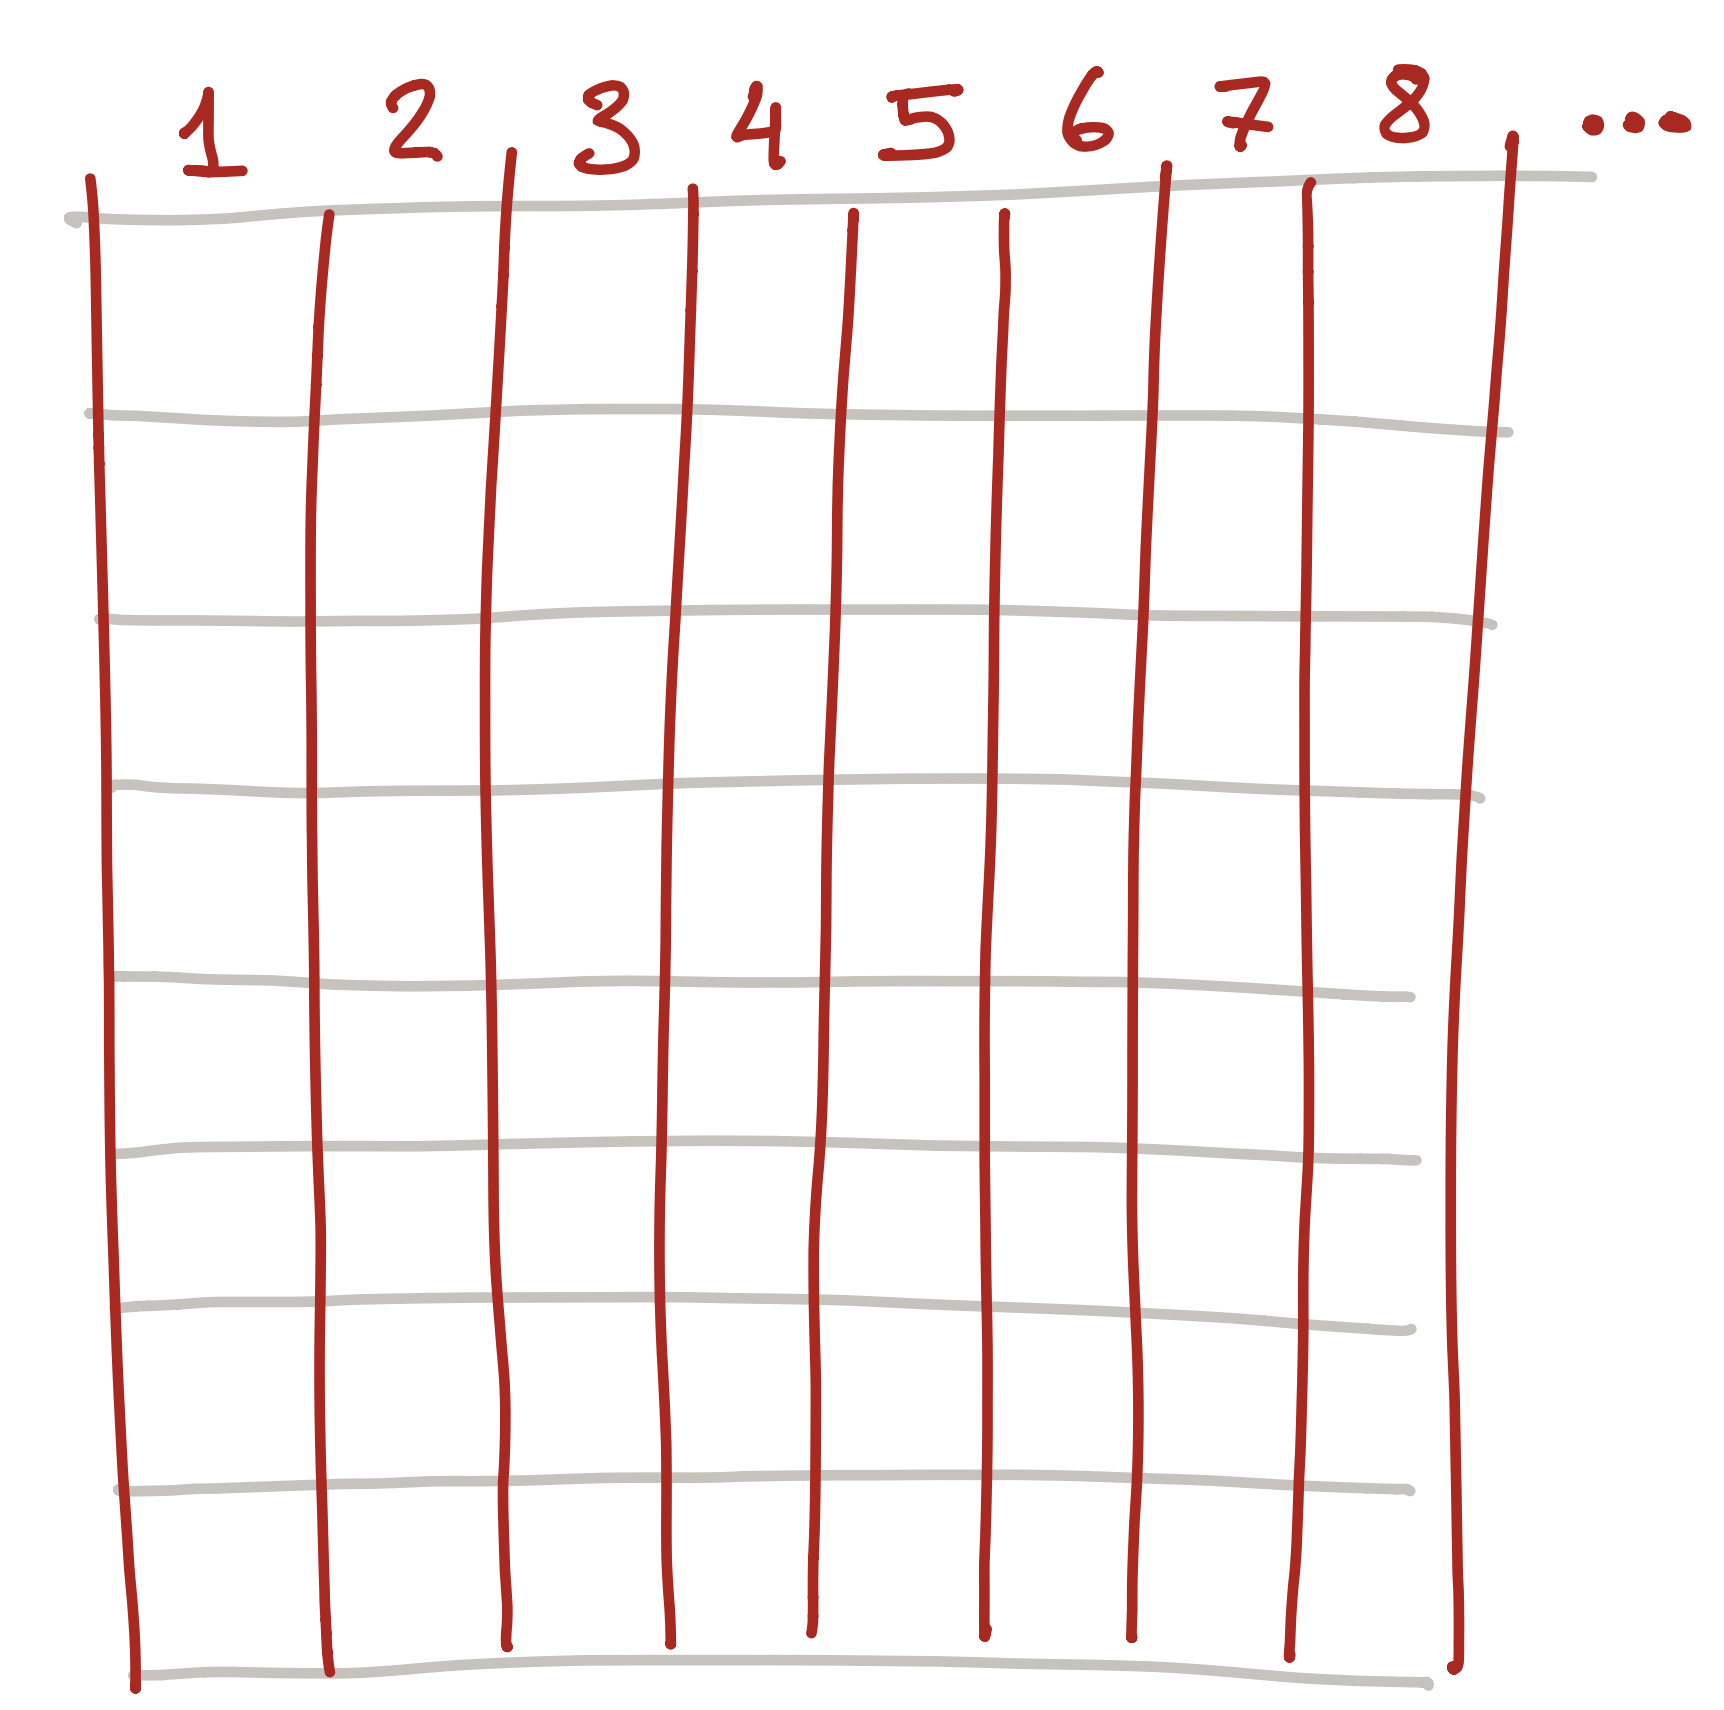 Illustration of graph paper with columns numbered